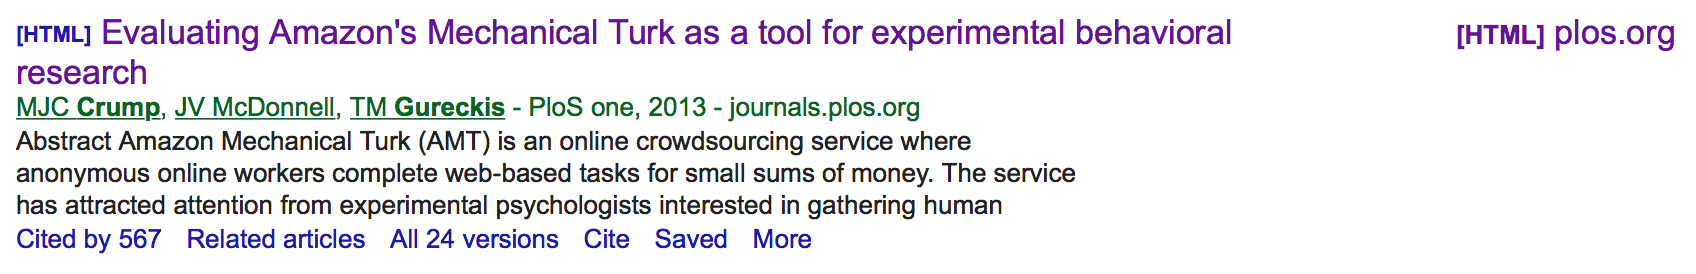 Example search result from Google Scholar